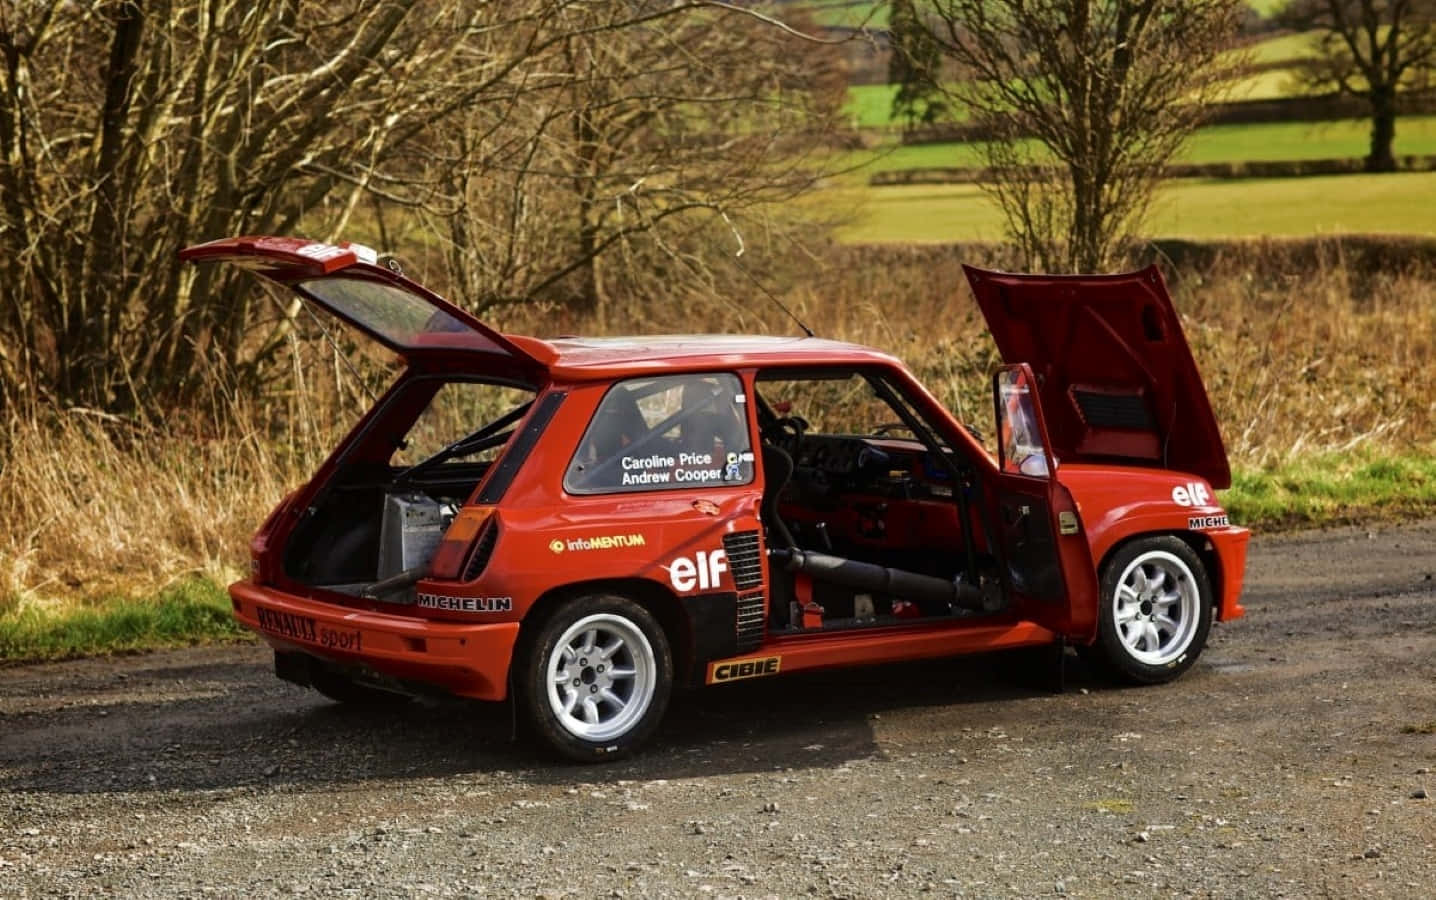 Iconic Renault 5 Turbo in Action Wallpaper